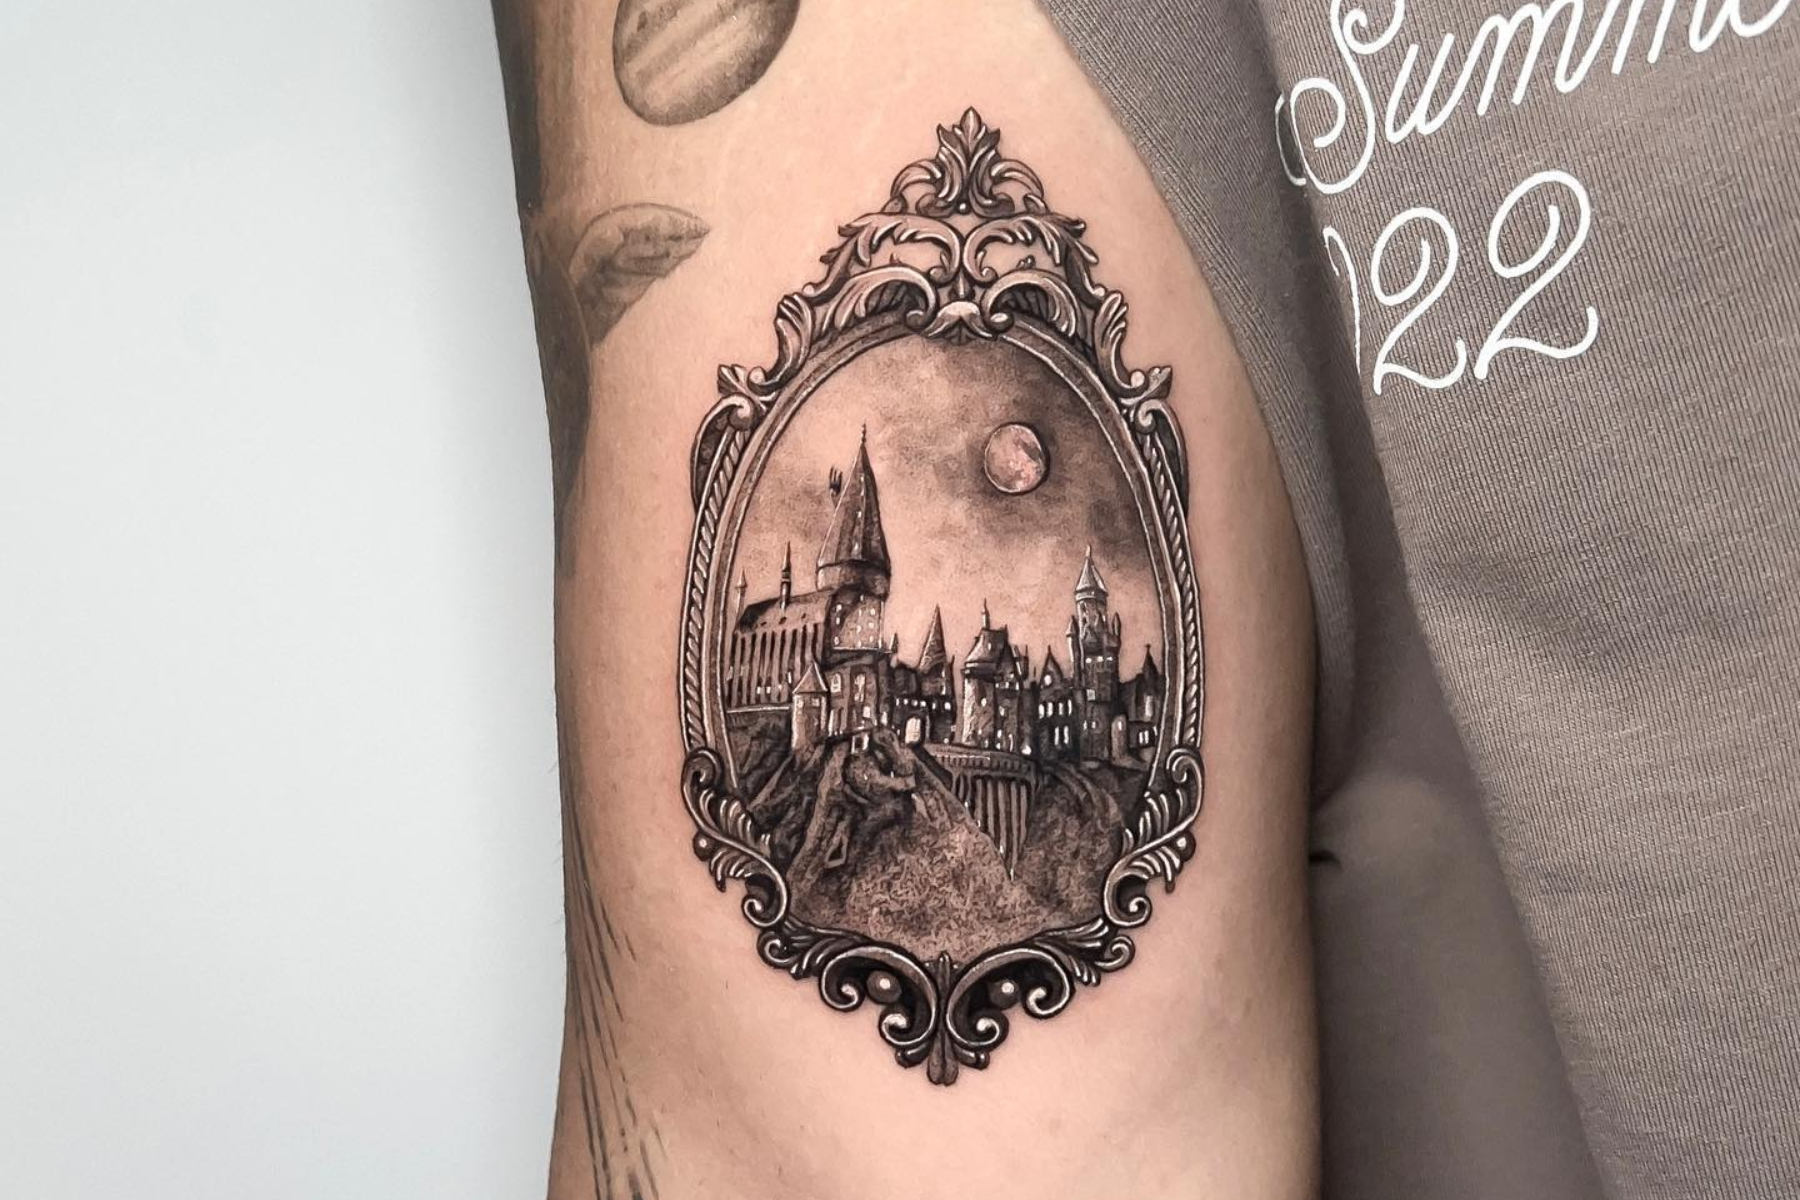 20+ meaningful Harry Potter tattoo ideas for die-hard Potterheads - Legit.ng